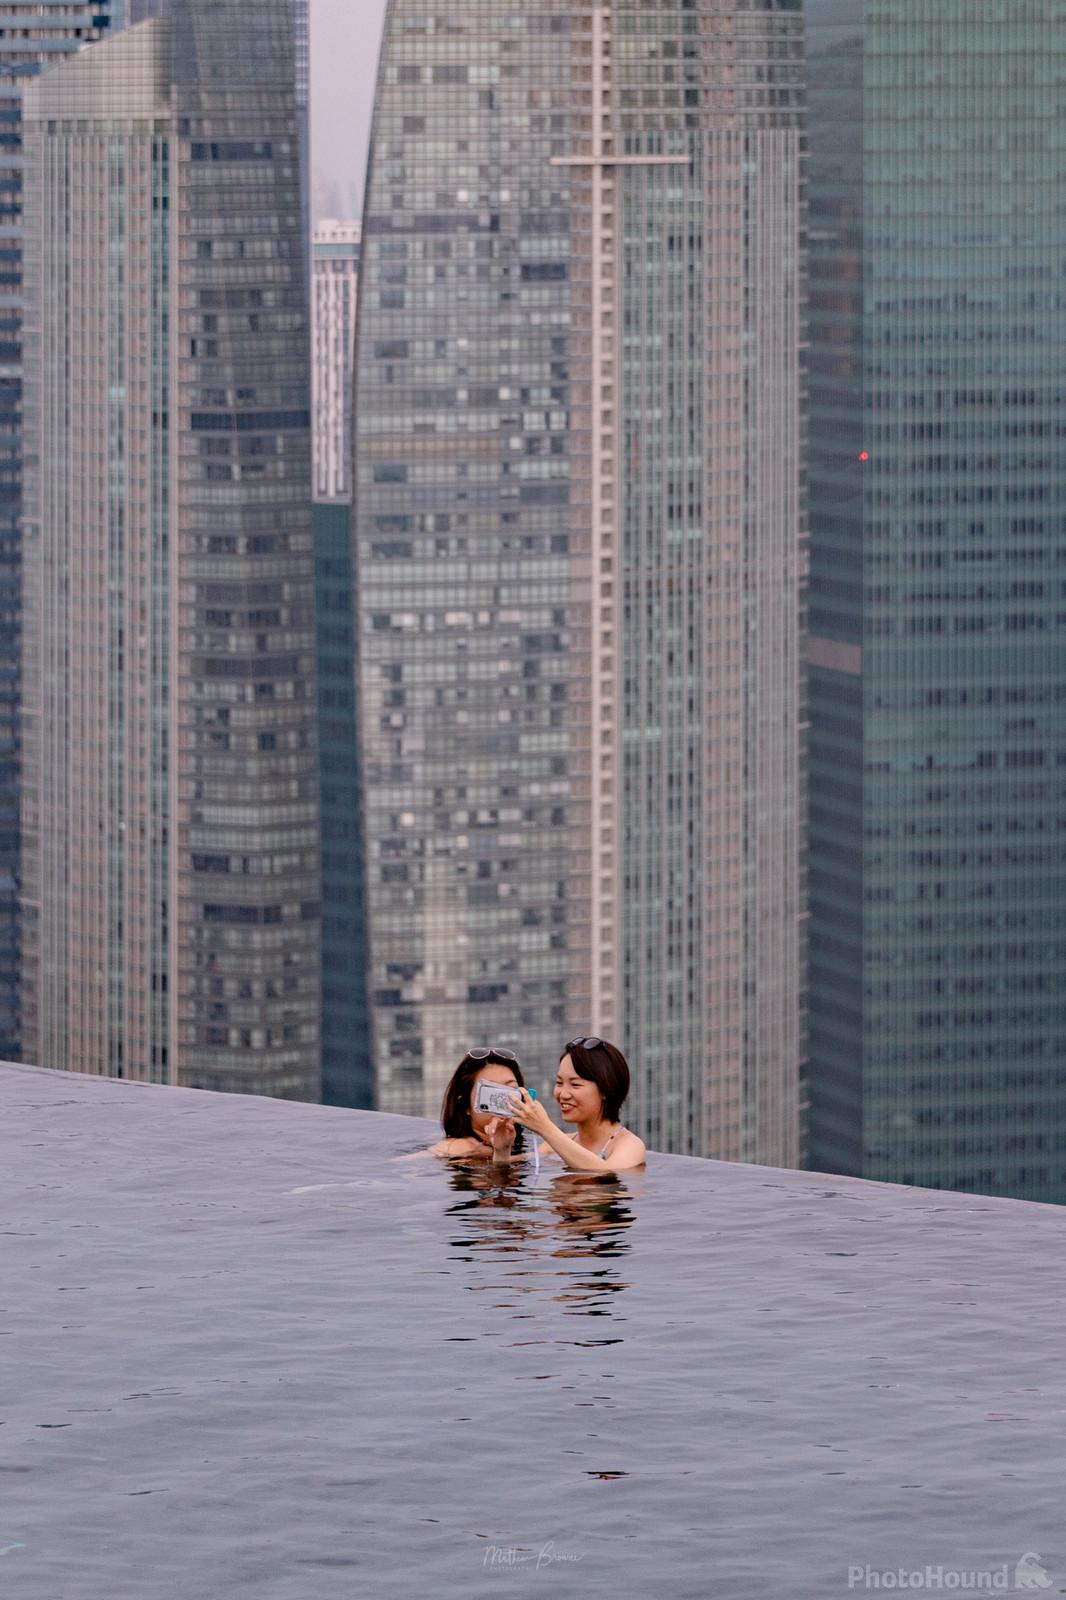 Image of Marina Bay Sands - Hotel & Rooftop Infinity Pool by Mathew Browne